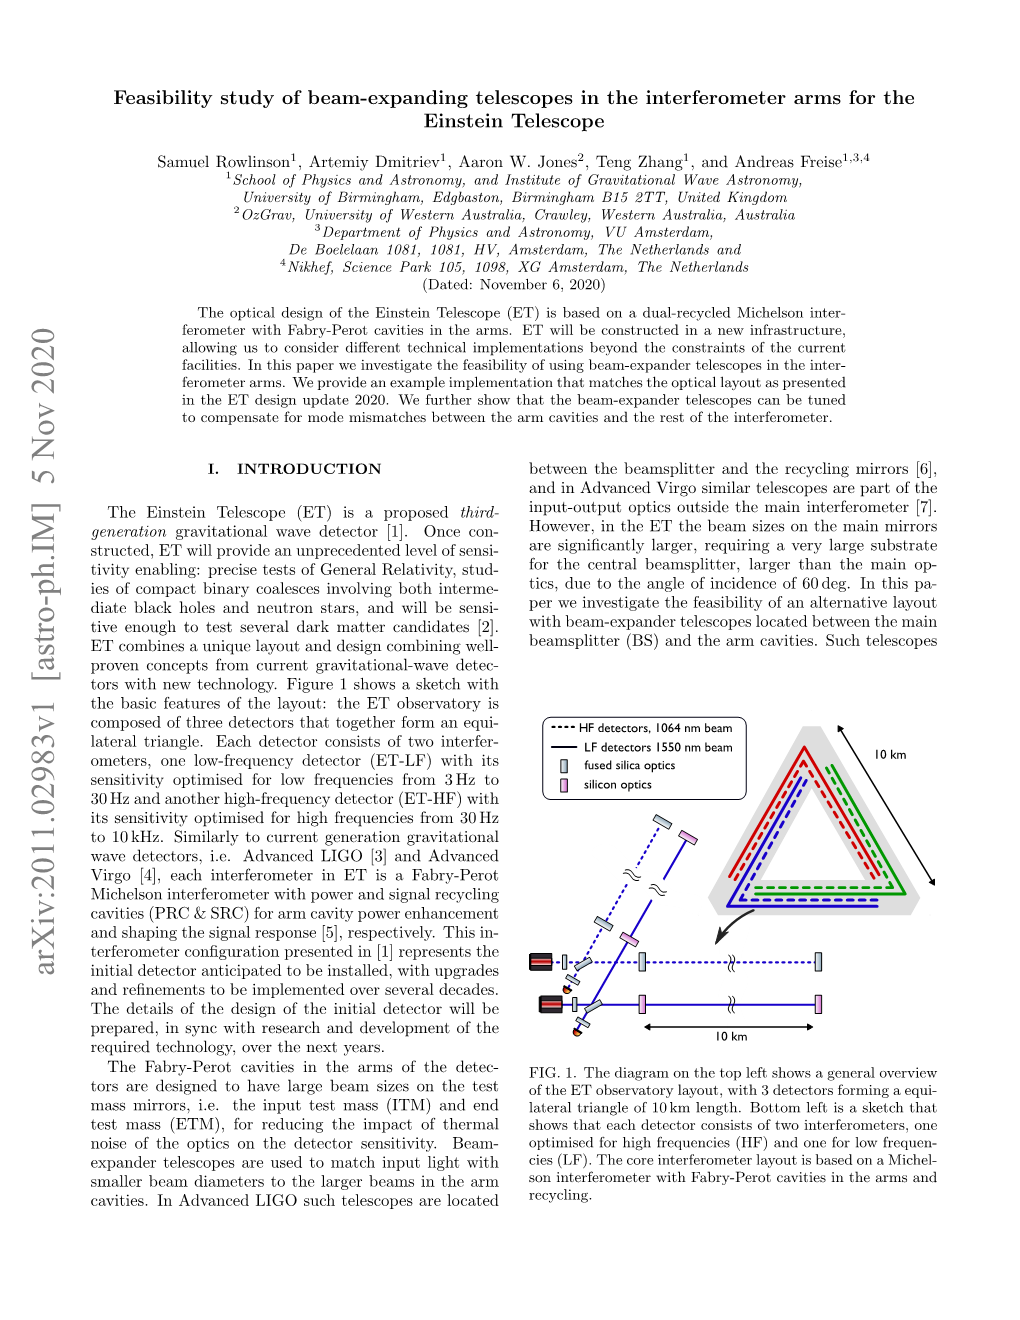 Feasibility Study of Beam-Expanding Telescopes in the Interferometer Arms for the Einstein Telescope